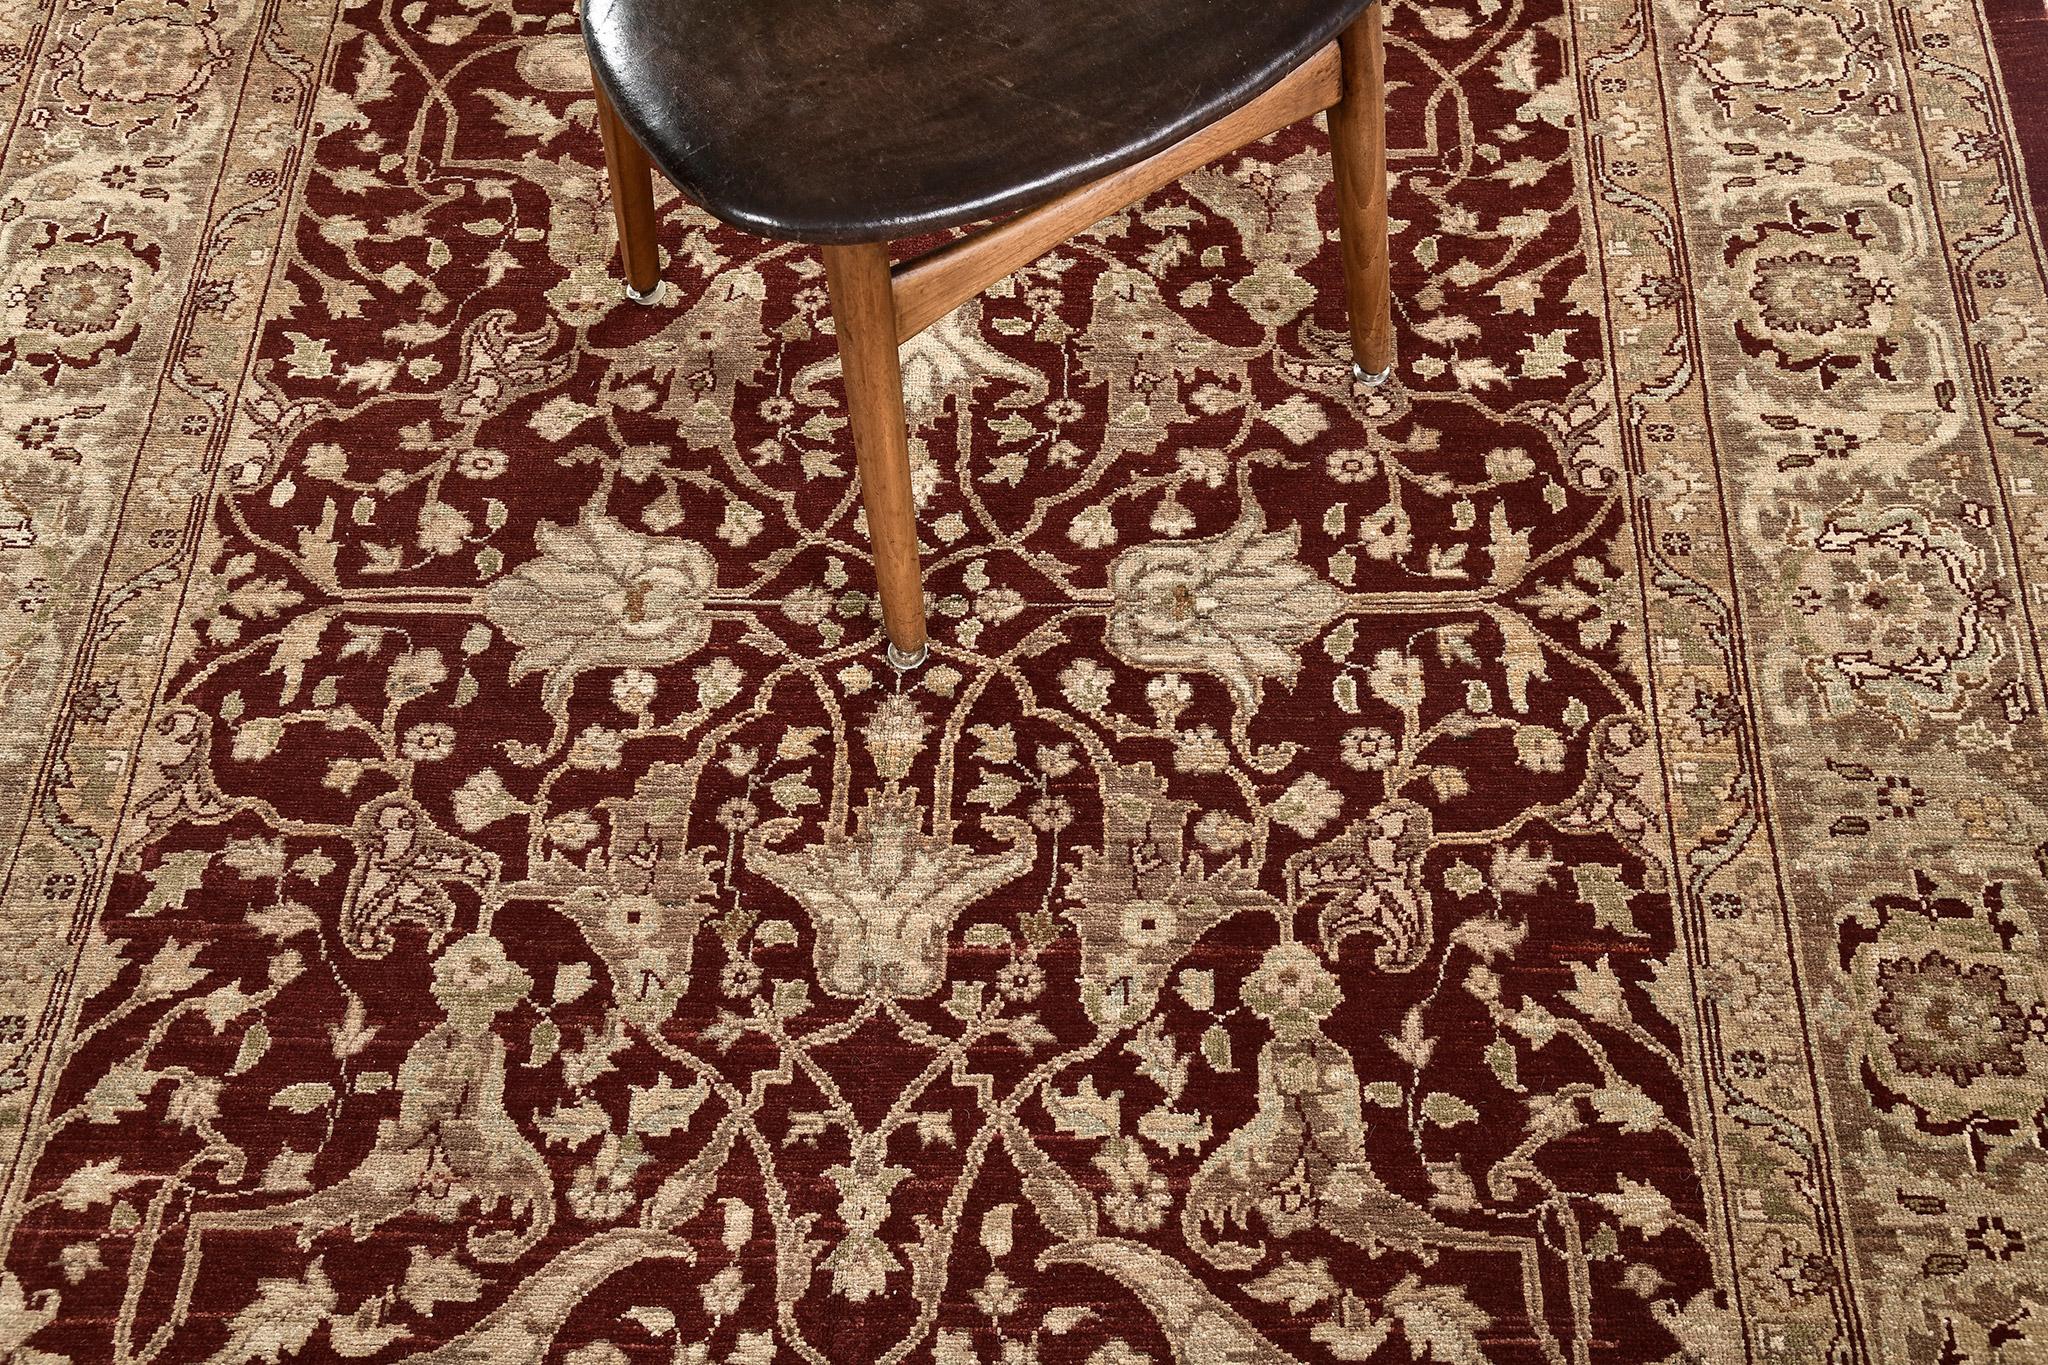 A vibrant revival of Gordes design rug that features the majestic tones of dark ruby red and ivory. The abrashed field is covered with all-over pattern composed of floral sprigs, blooming palmettes, sickle leaves, stylized florals and leafy